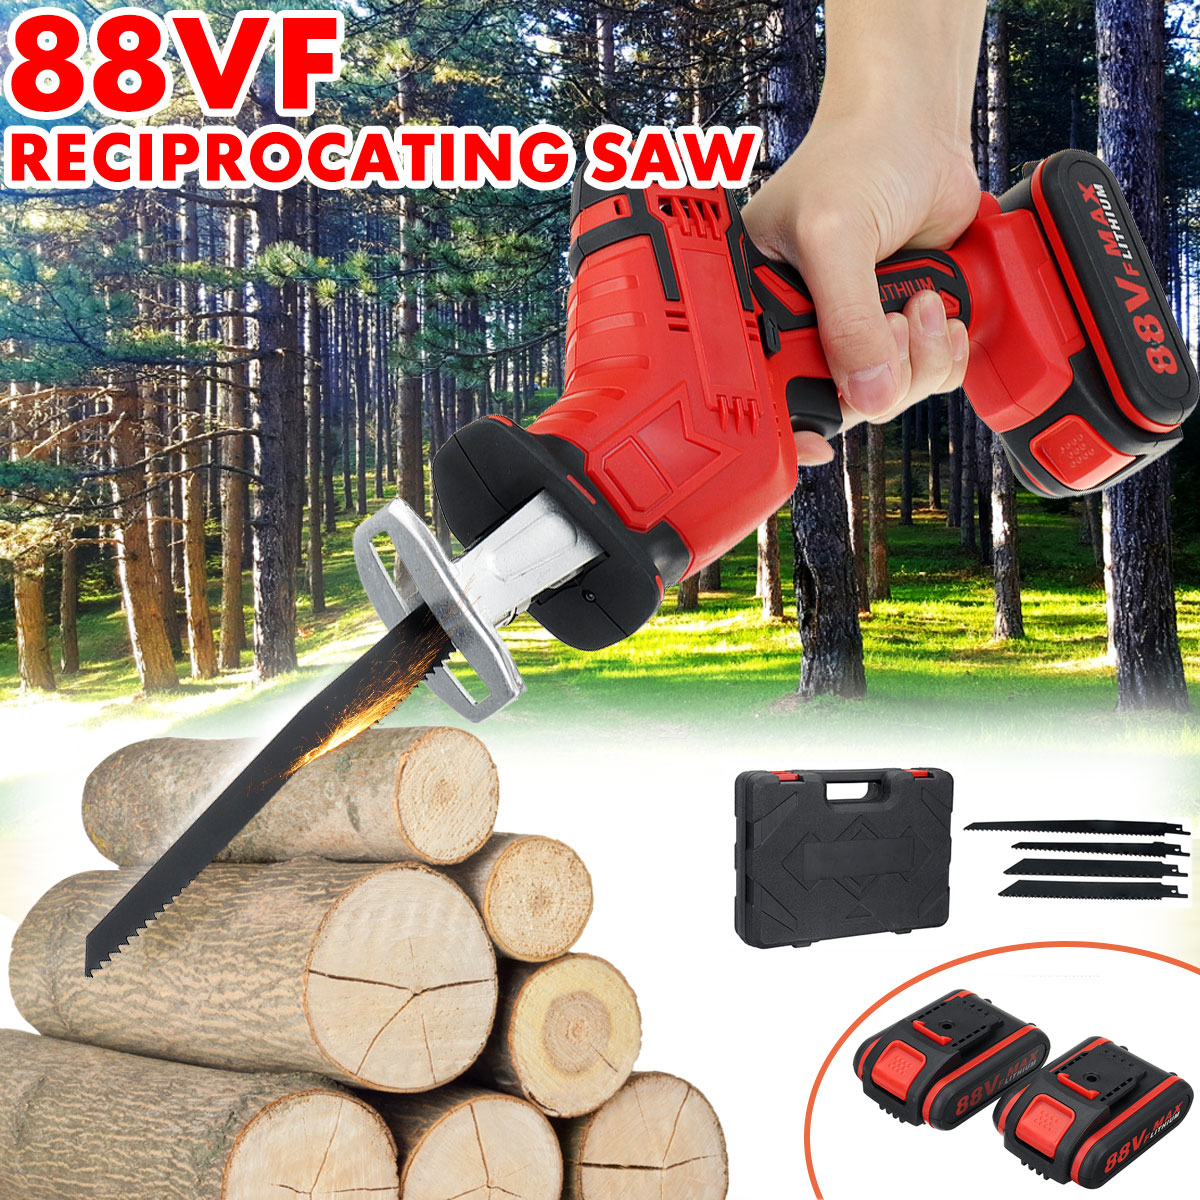 88VF-Cordless-Electric-Reciprocating-Saw-Outdoor-Portable-Woodworking-Tool-One-Hand-Saw-W-12-Battery-1883228-1